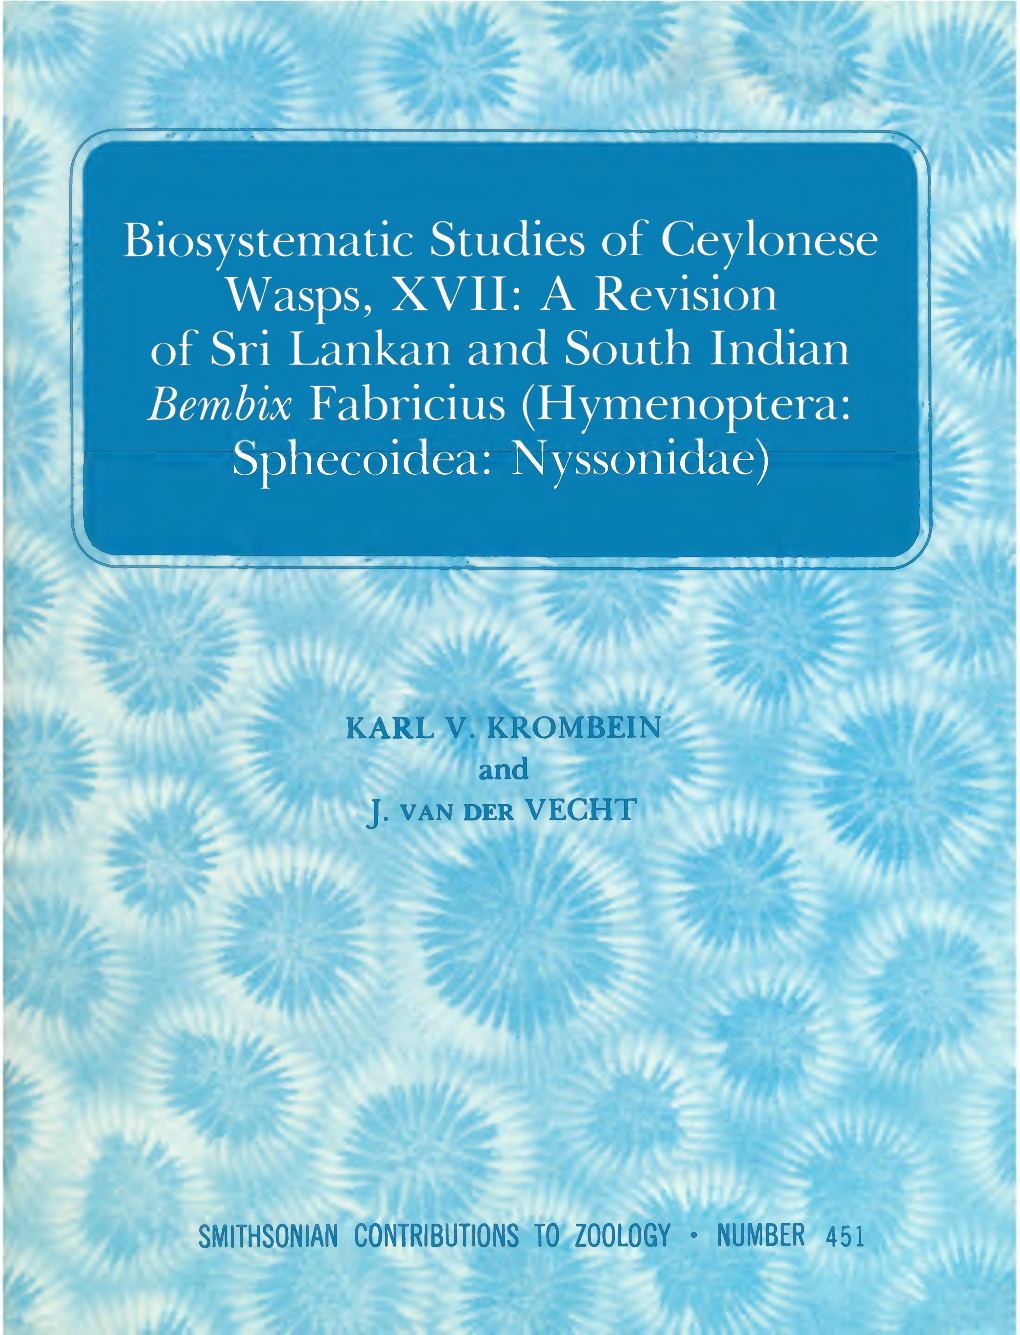 Biosystematic Studies of Ceylonese Wasps, XVII: a Revision of Sri Lankan and South Indian Bembix Fabricius (Hymenoptera: Sphecoidea: Nyssonidae)